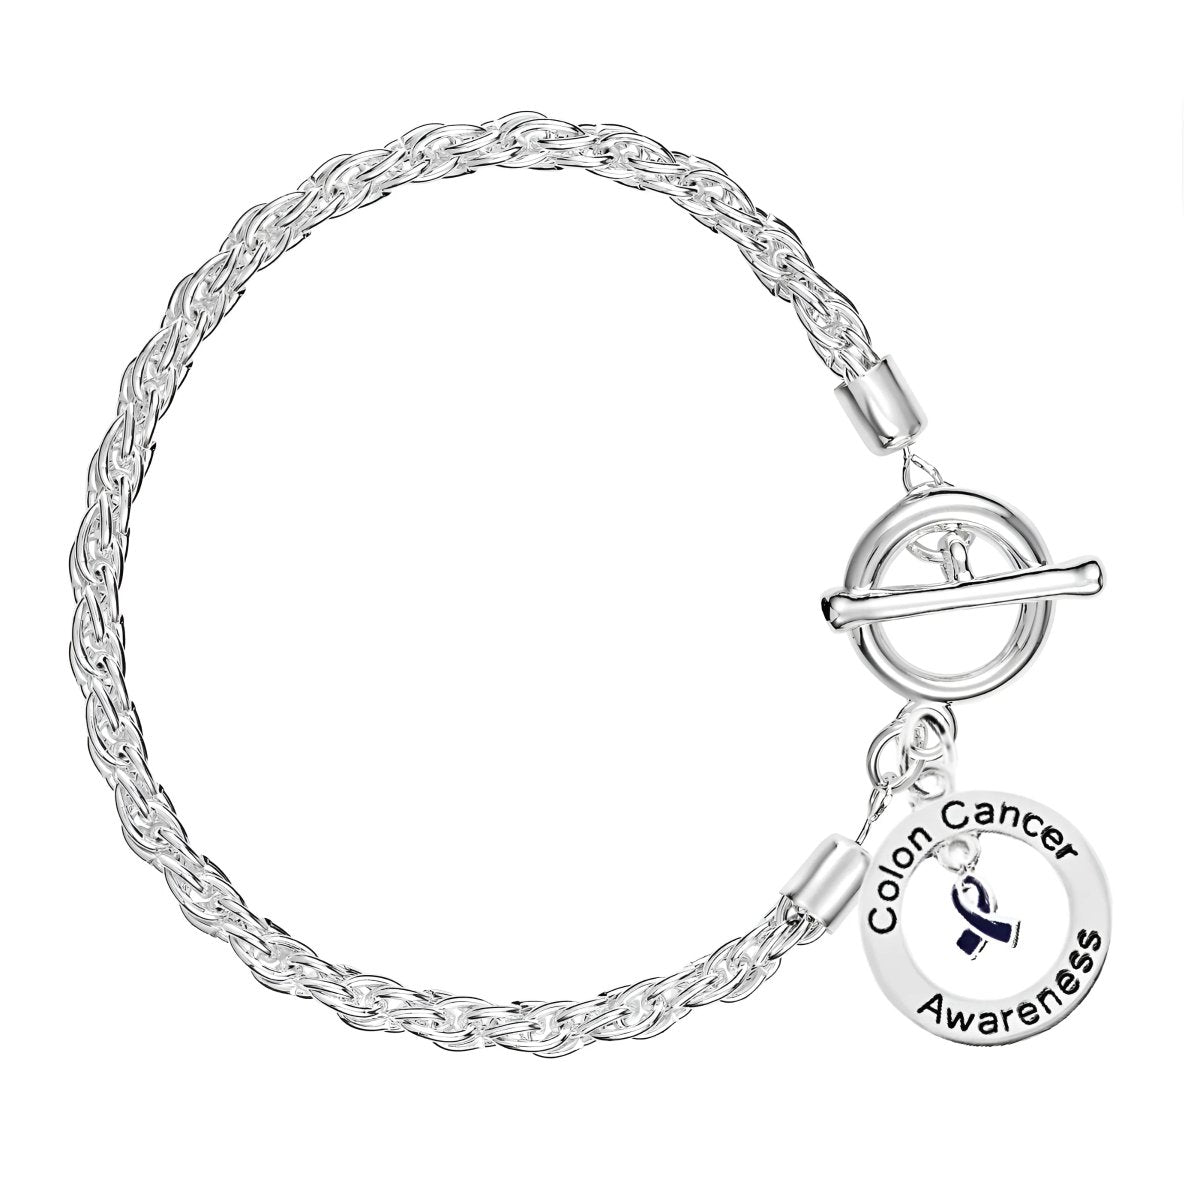 Colon Cancer Circle Dark Blue Ribbon Rope Charm Bracelets - Fundraising For A Cause